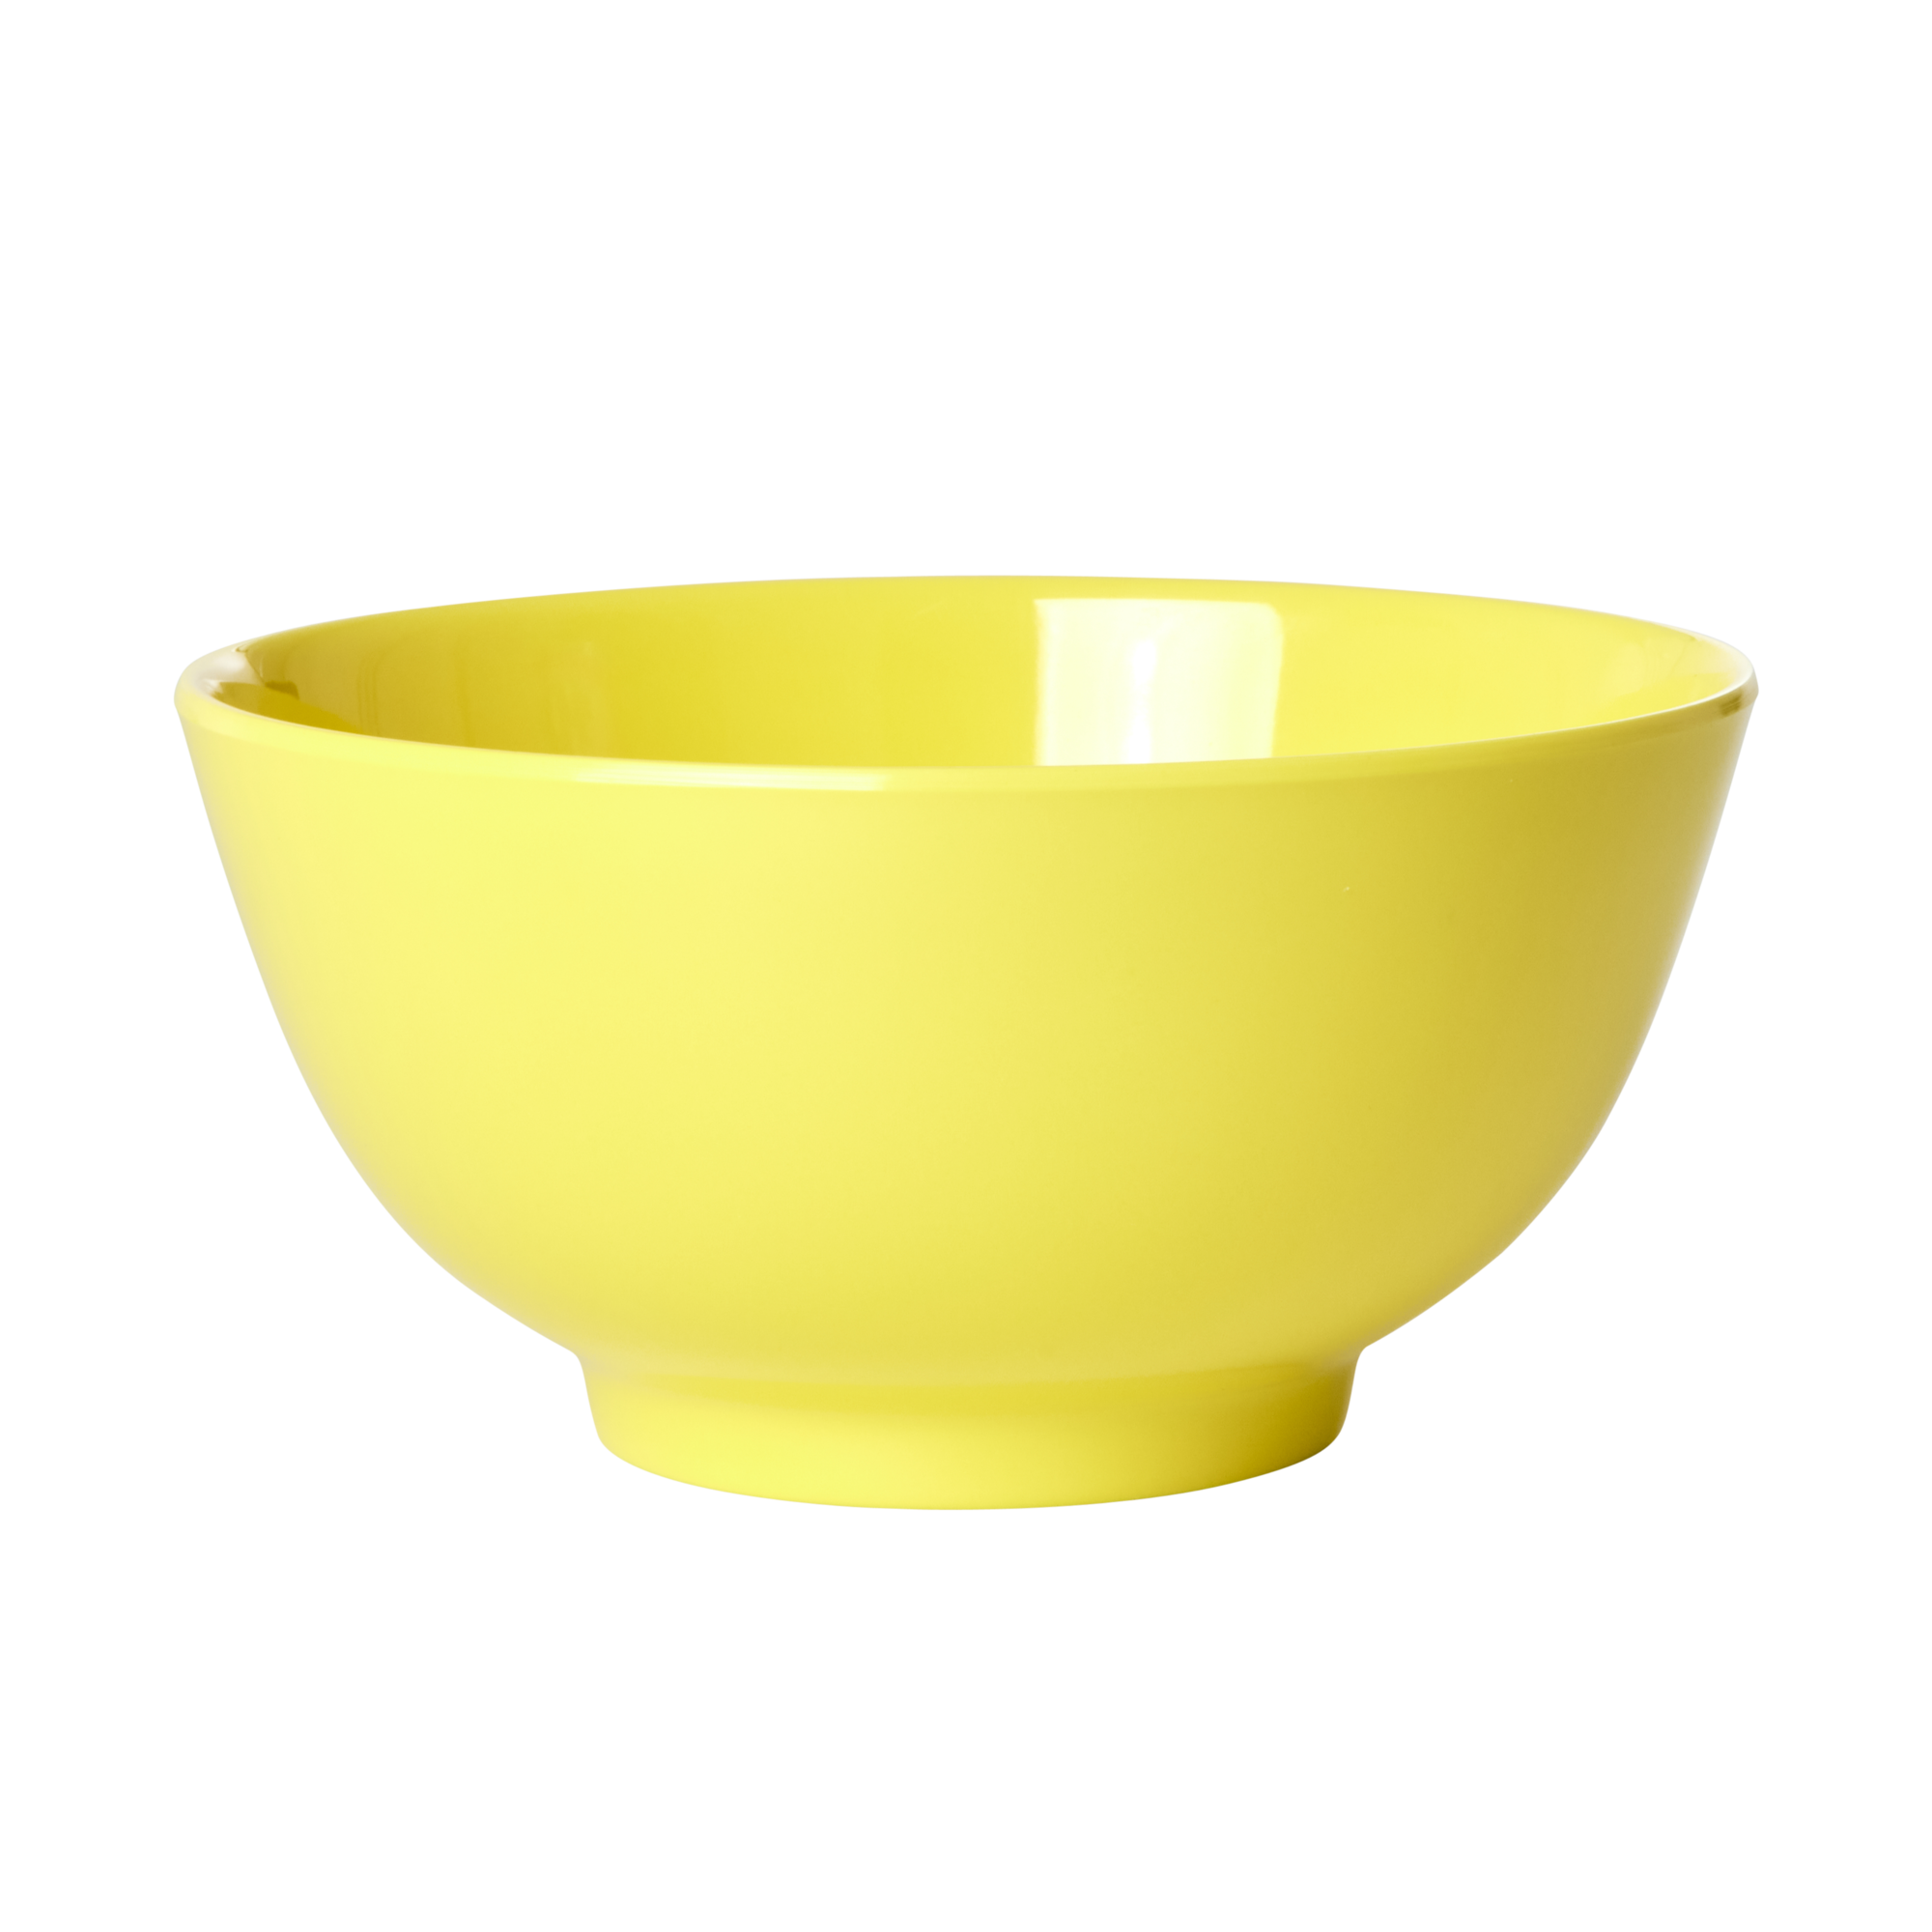 Melamine bowl by Rice by Rice in the color yellow